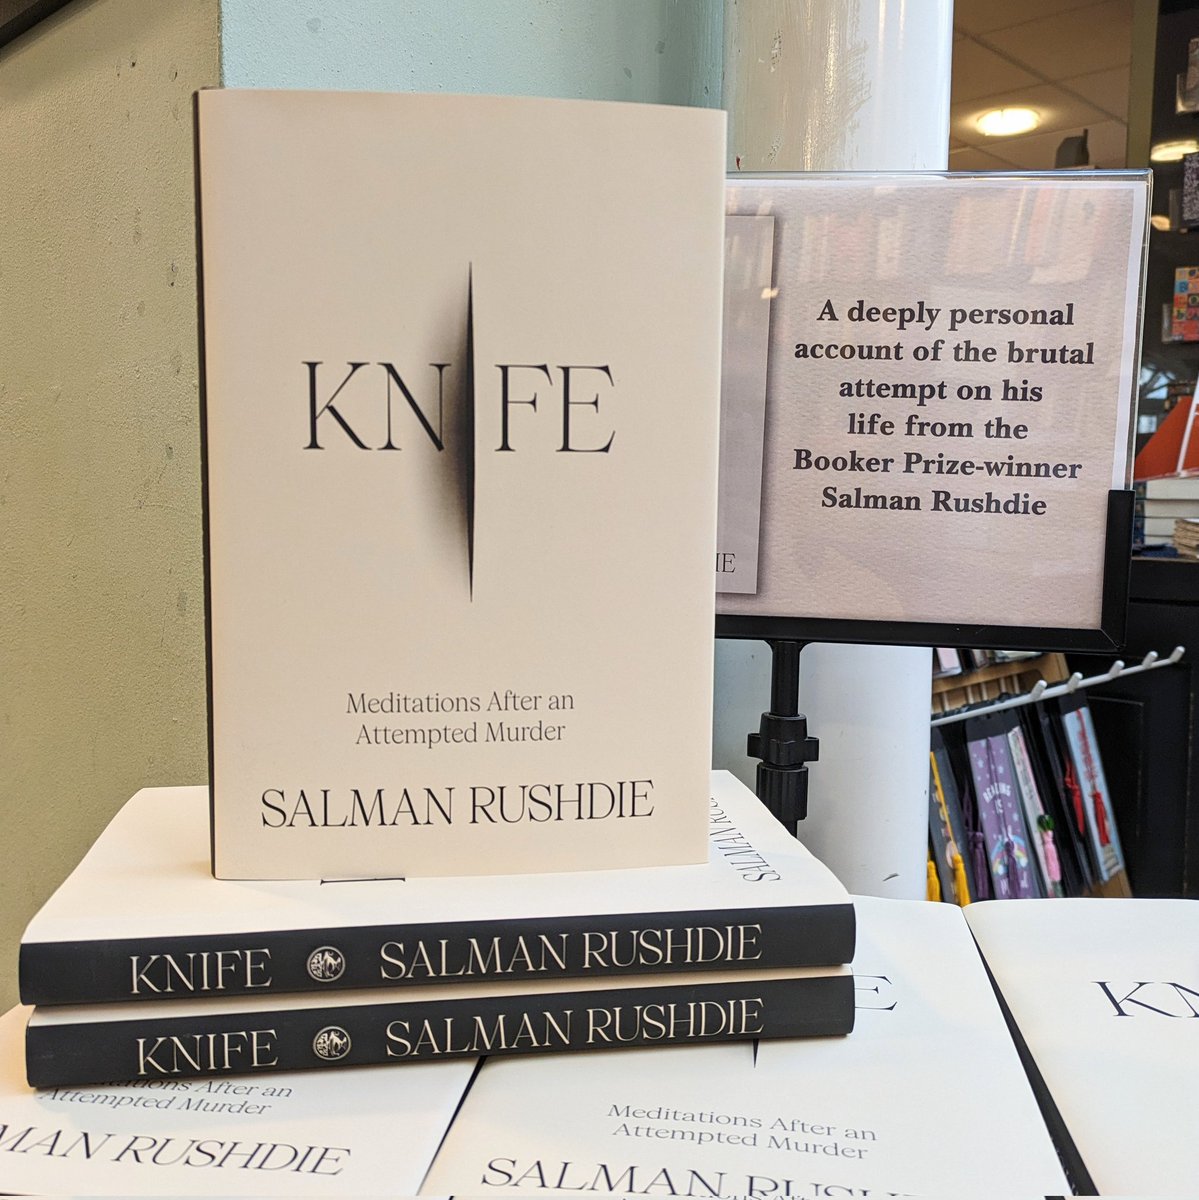 From internationally renowned writer and Booker Prize winner Salman Rushdie comes a searing, deeply personal account of enduring - and surviving - an attack on his life, thirty years after the fatwa that was ordered against him. #waterstones #salmanrushdie